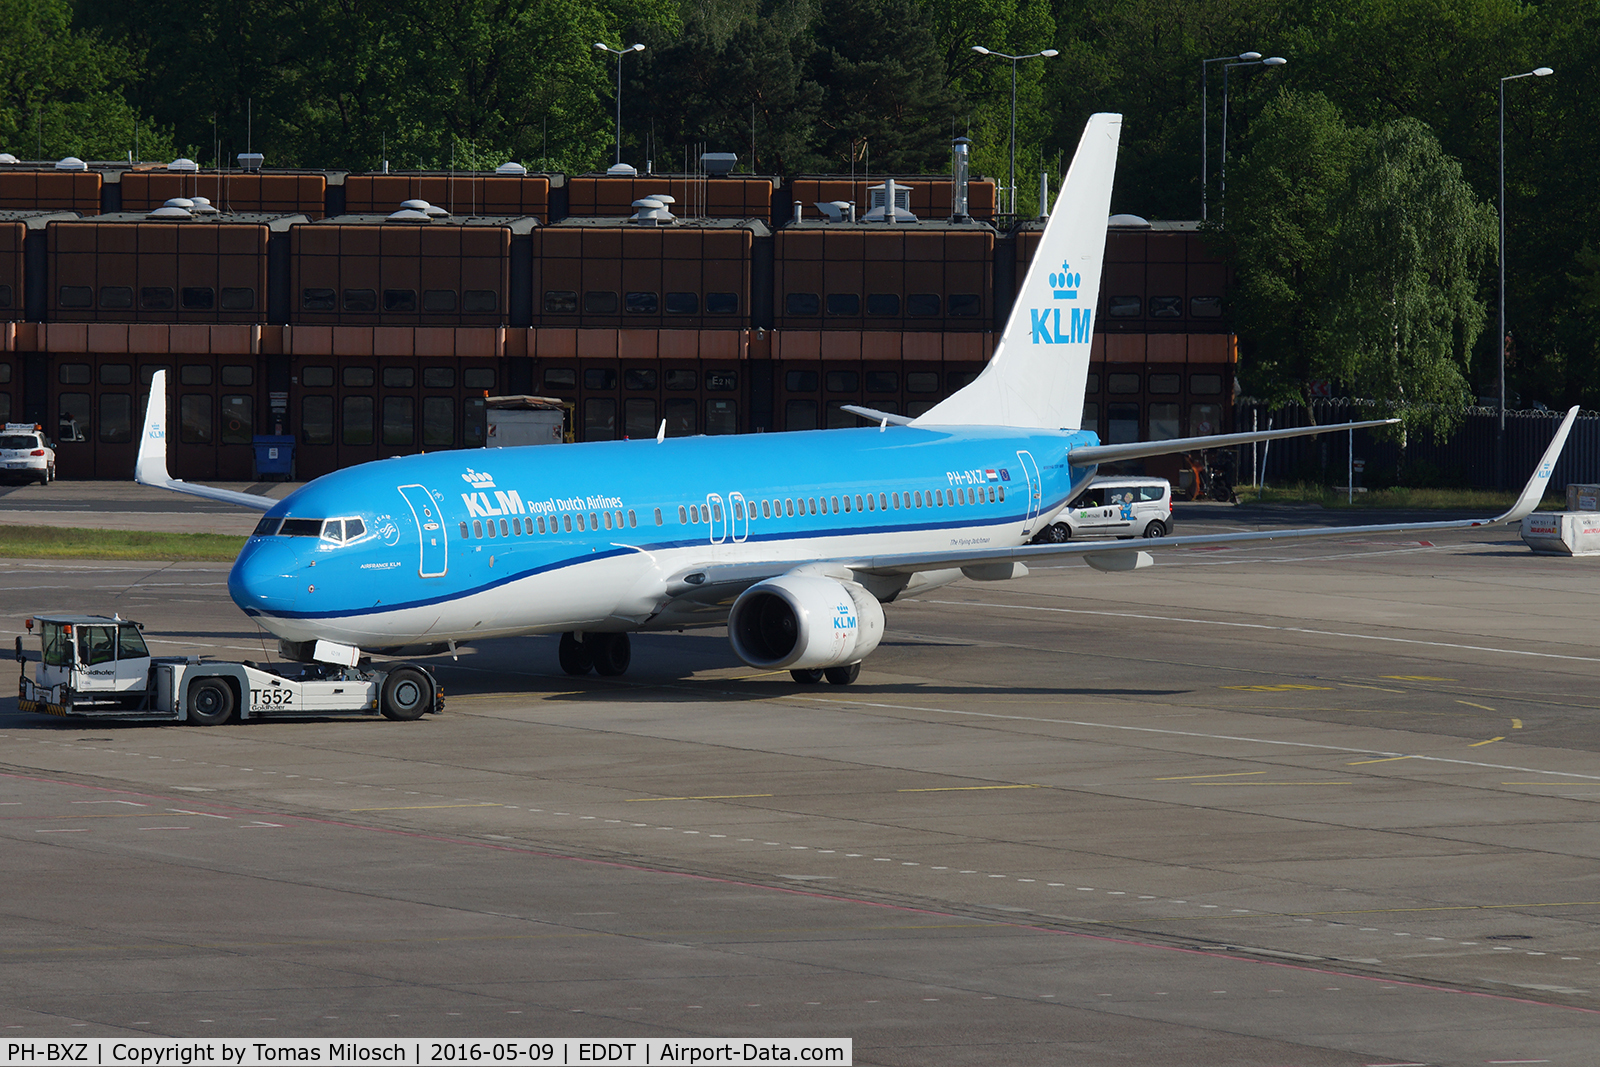 PH-BXZ, 2008 Boeing 737-8K2 C/N 30368, Pushback for its flight back to AMS